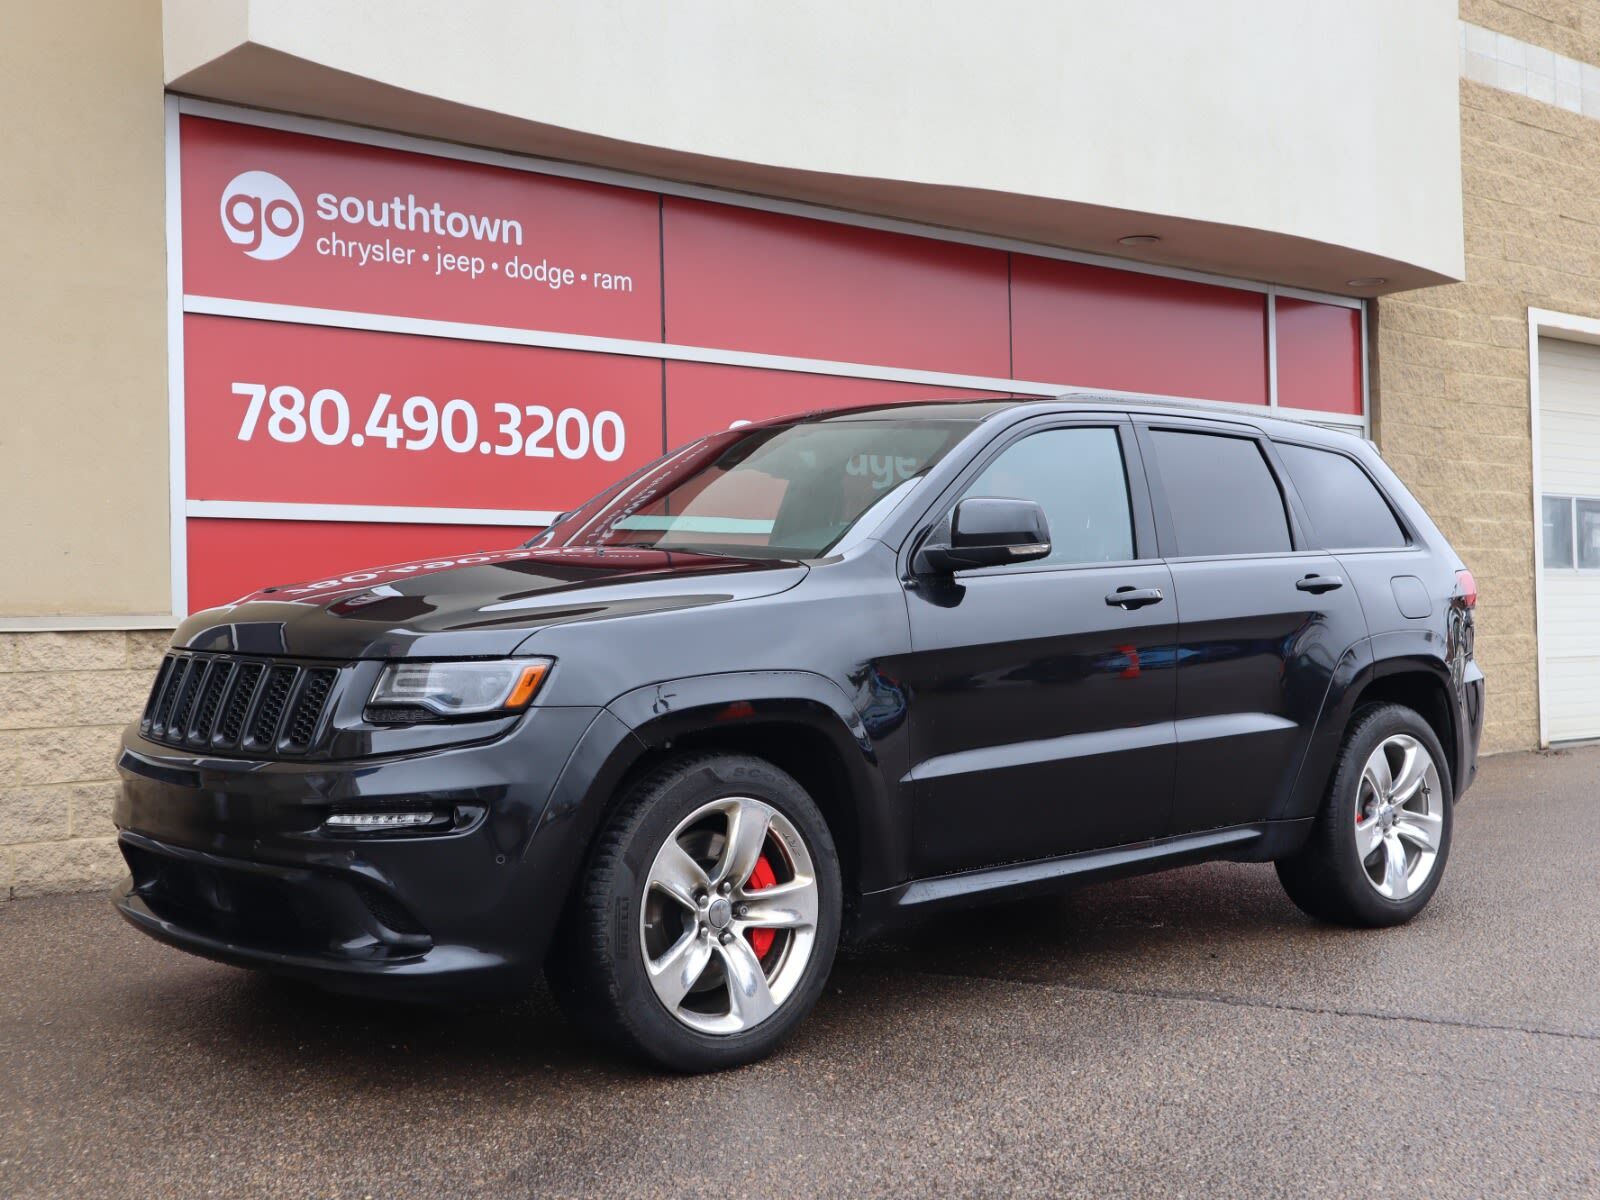 2016 Jeep Grand Cherokee SRT IN BRILLIANT BLACK EQUIPPED WITH A 6.4L HEMI S